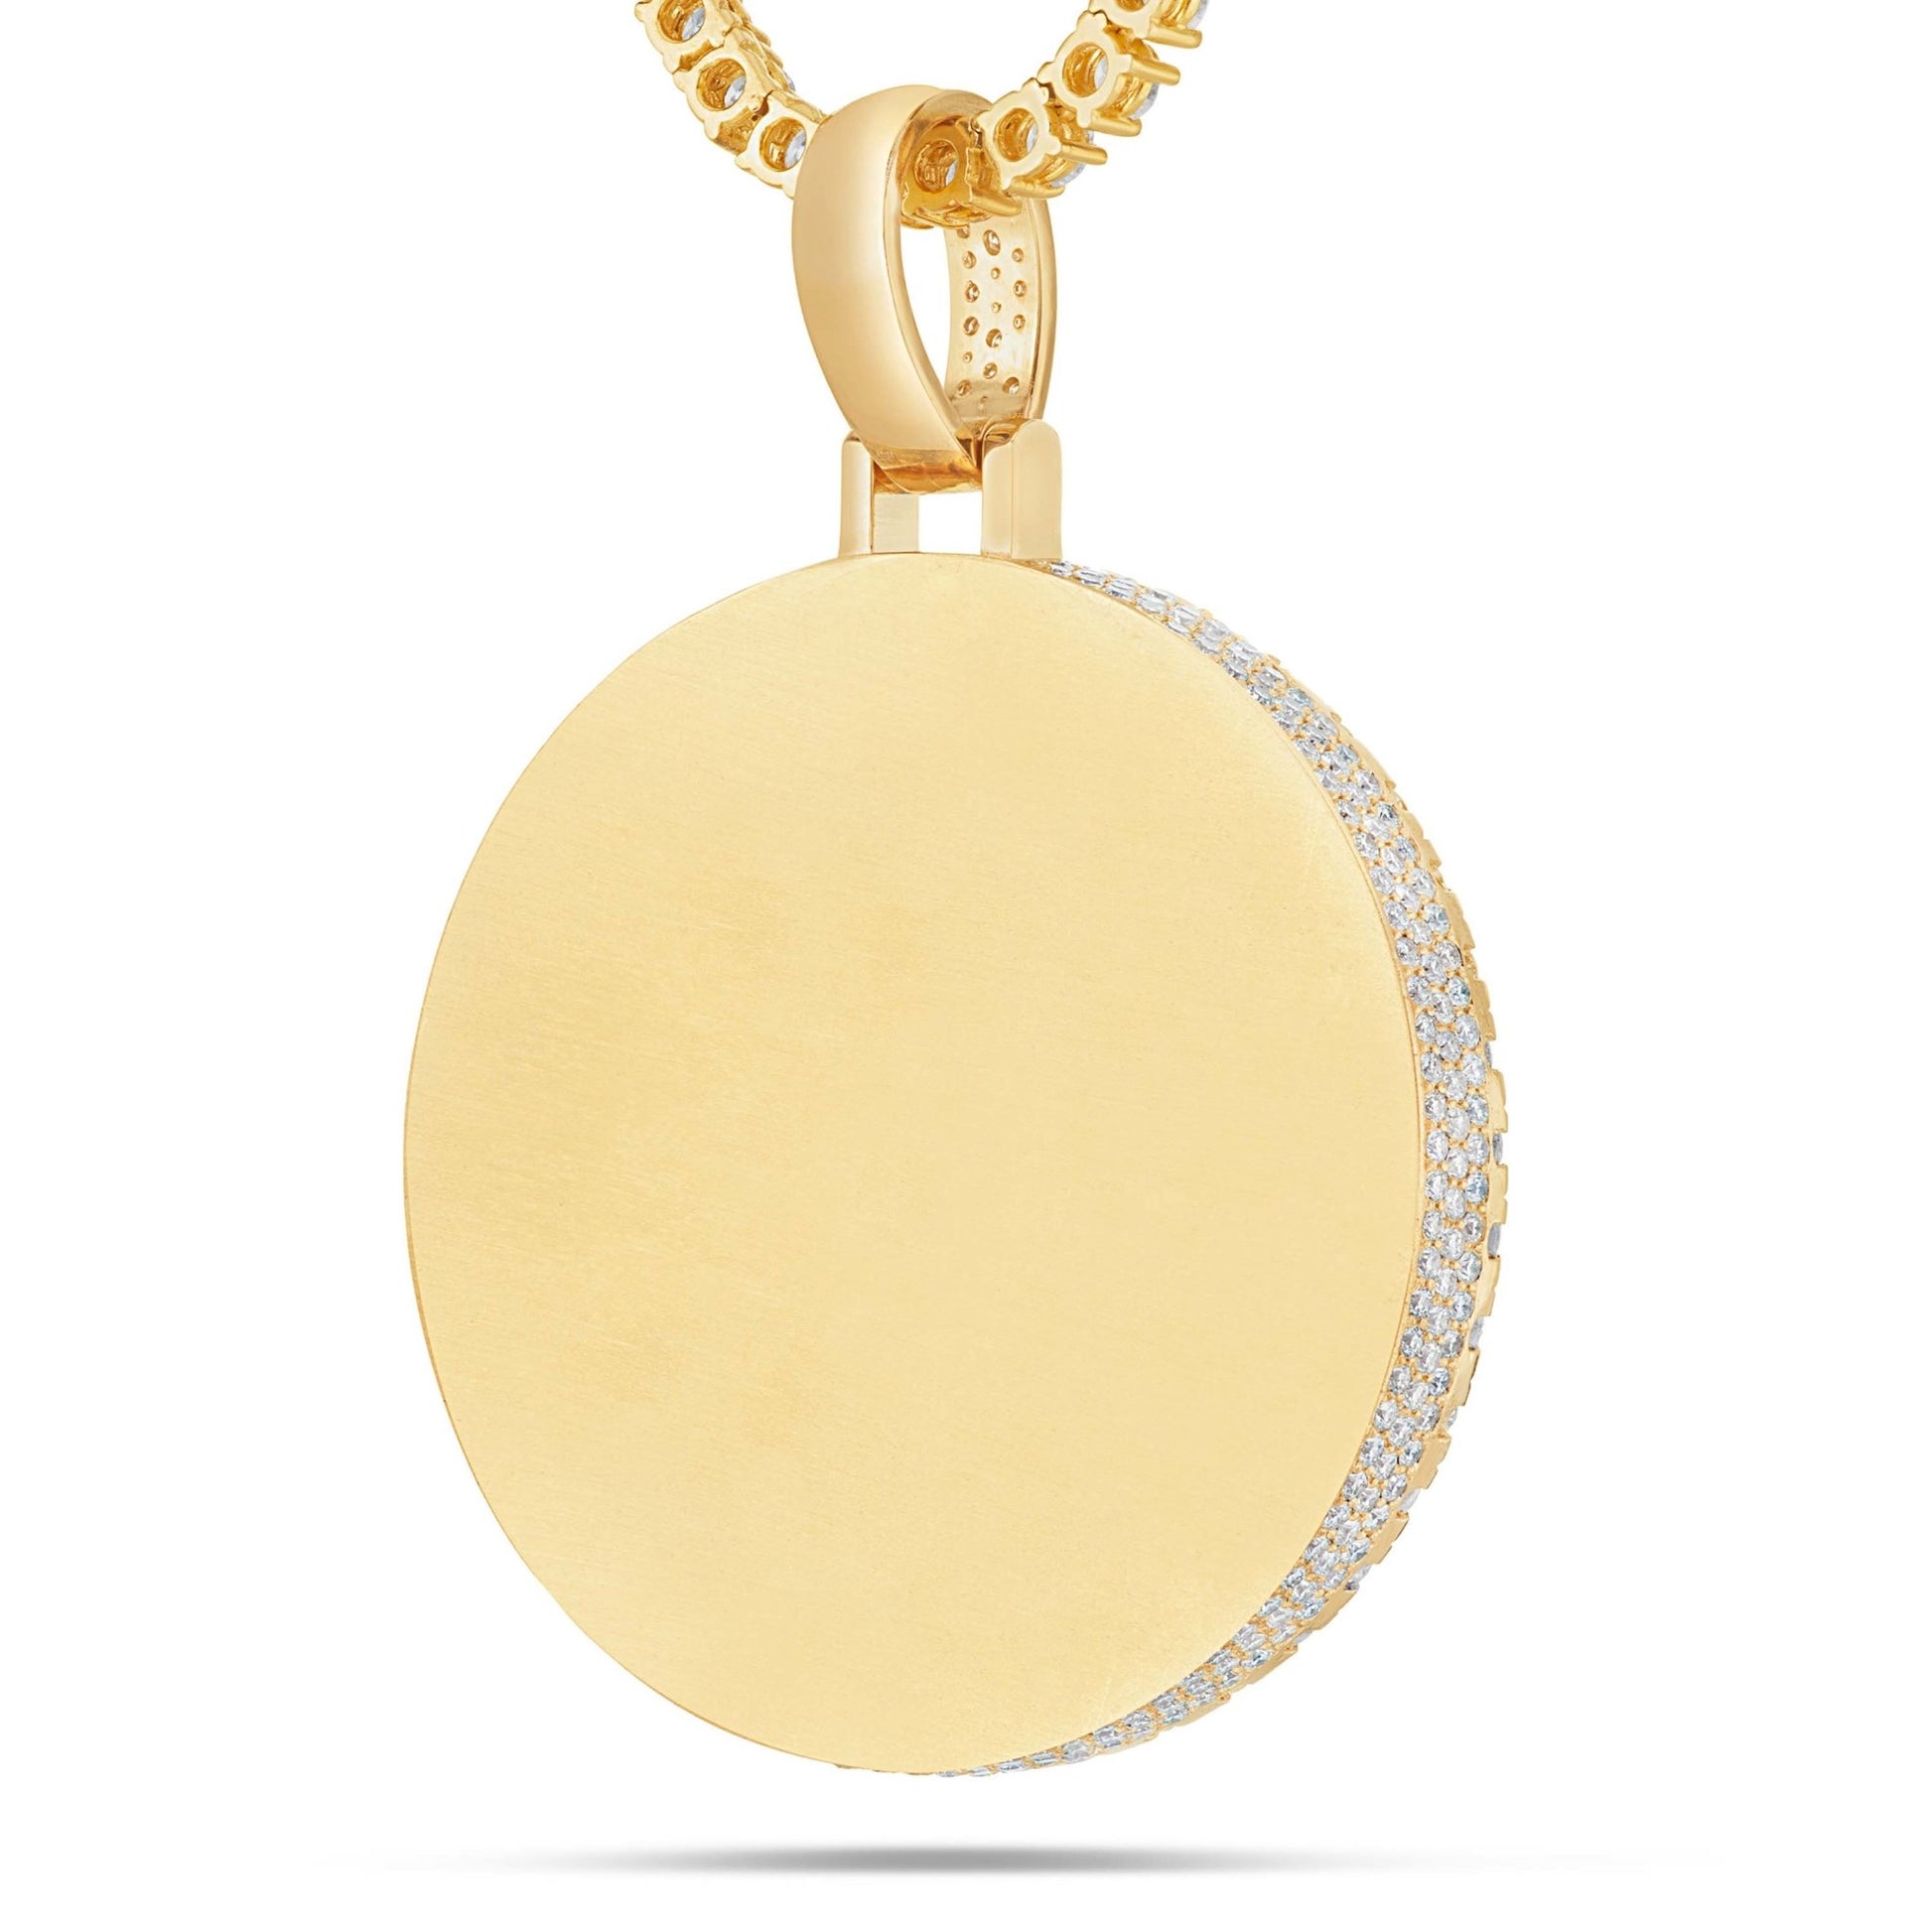 Hollywood Diamond Picture Pendant, 2 Inches - Shyne Jewelers 160-00079 Yellow Gold Shyne Jewelers